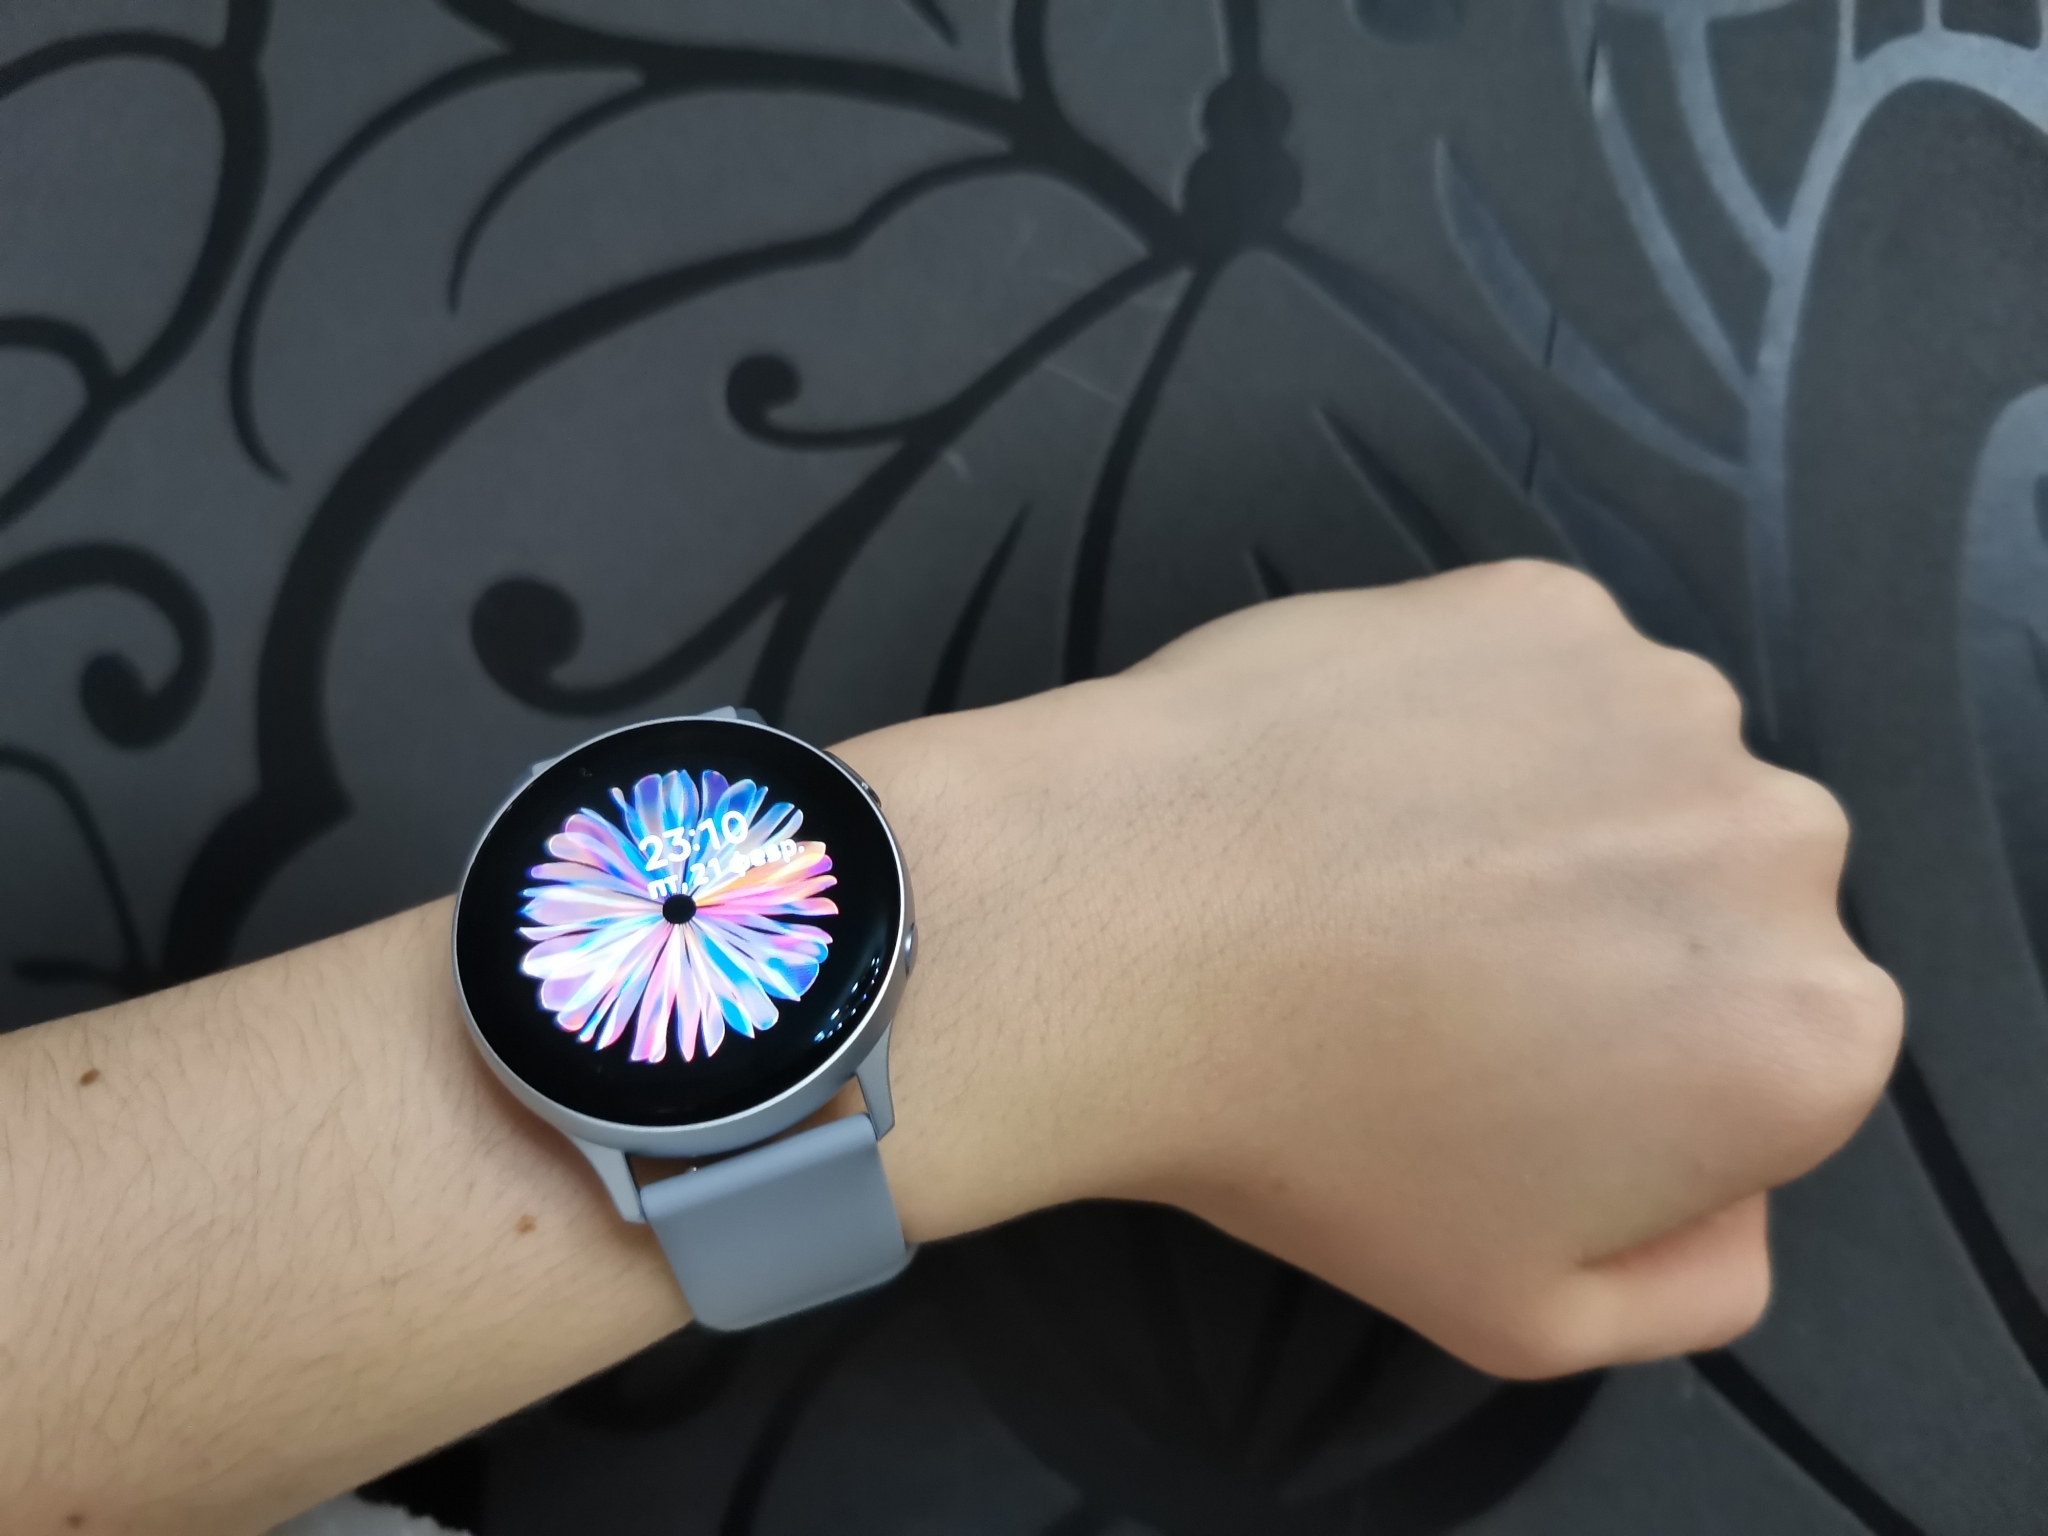 Samsung Galaxy Watch 4 Mobile Review